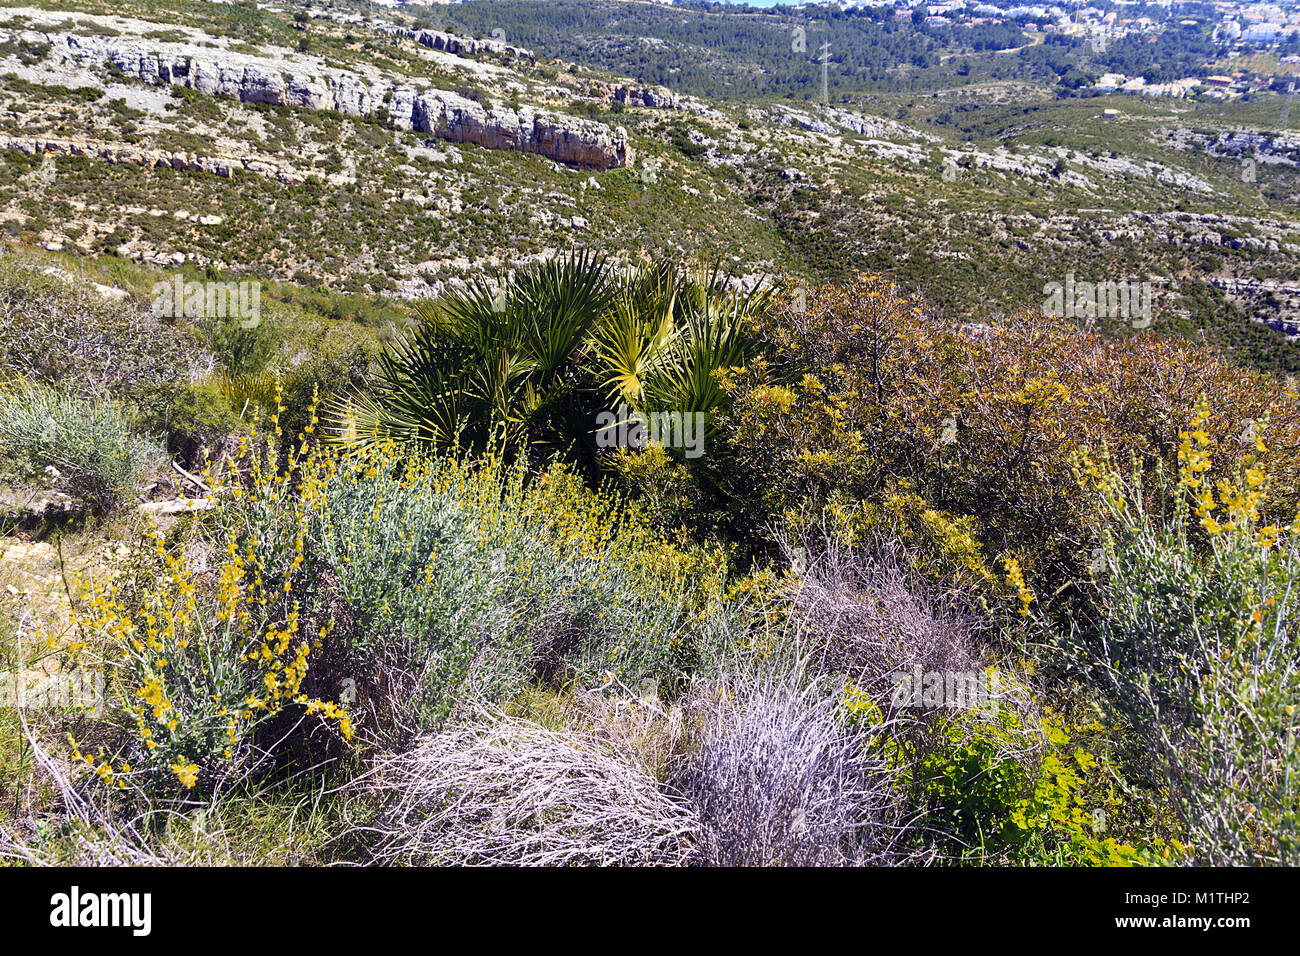 Plants growing naturally on the Mountain, Alcossebre, Spain Stock Photo